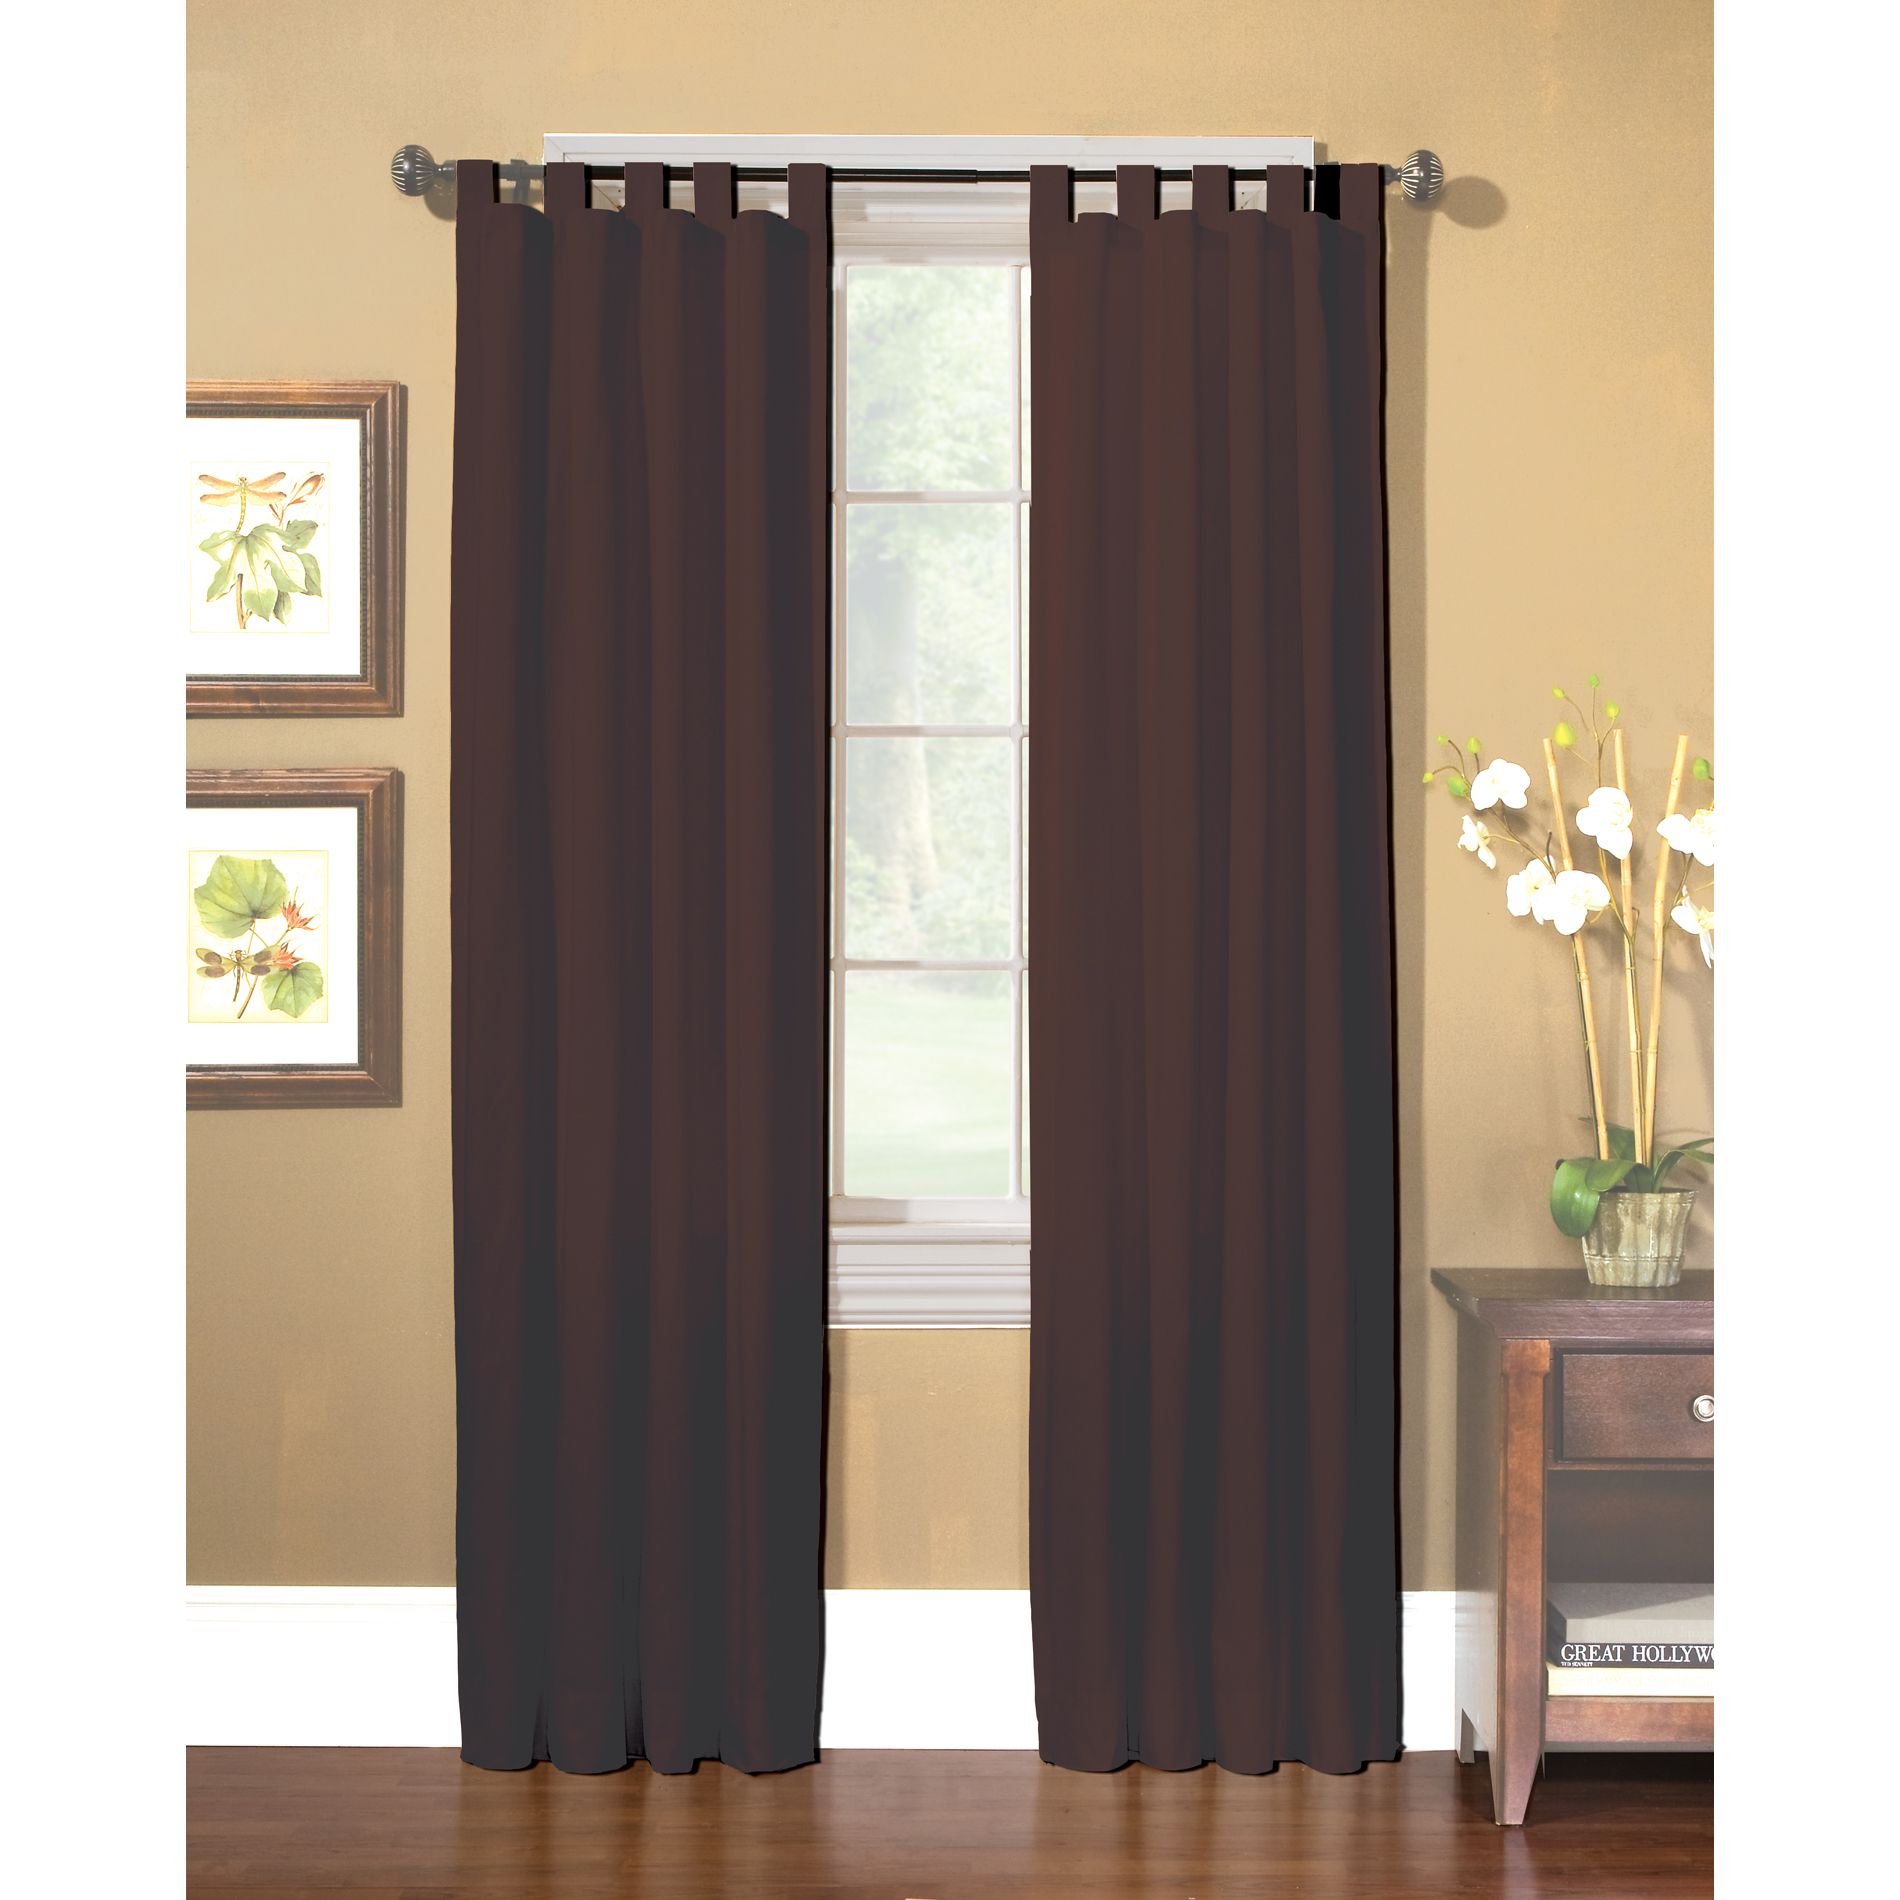 Country Living Rich Brown Sailcloth Window Panels